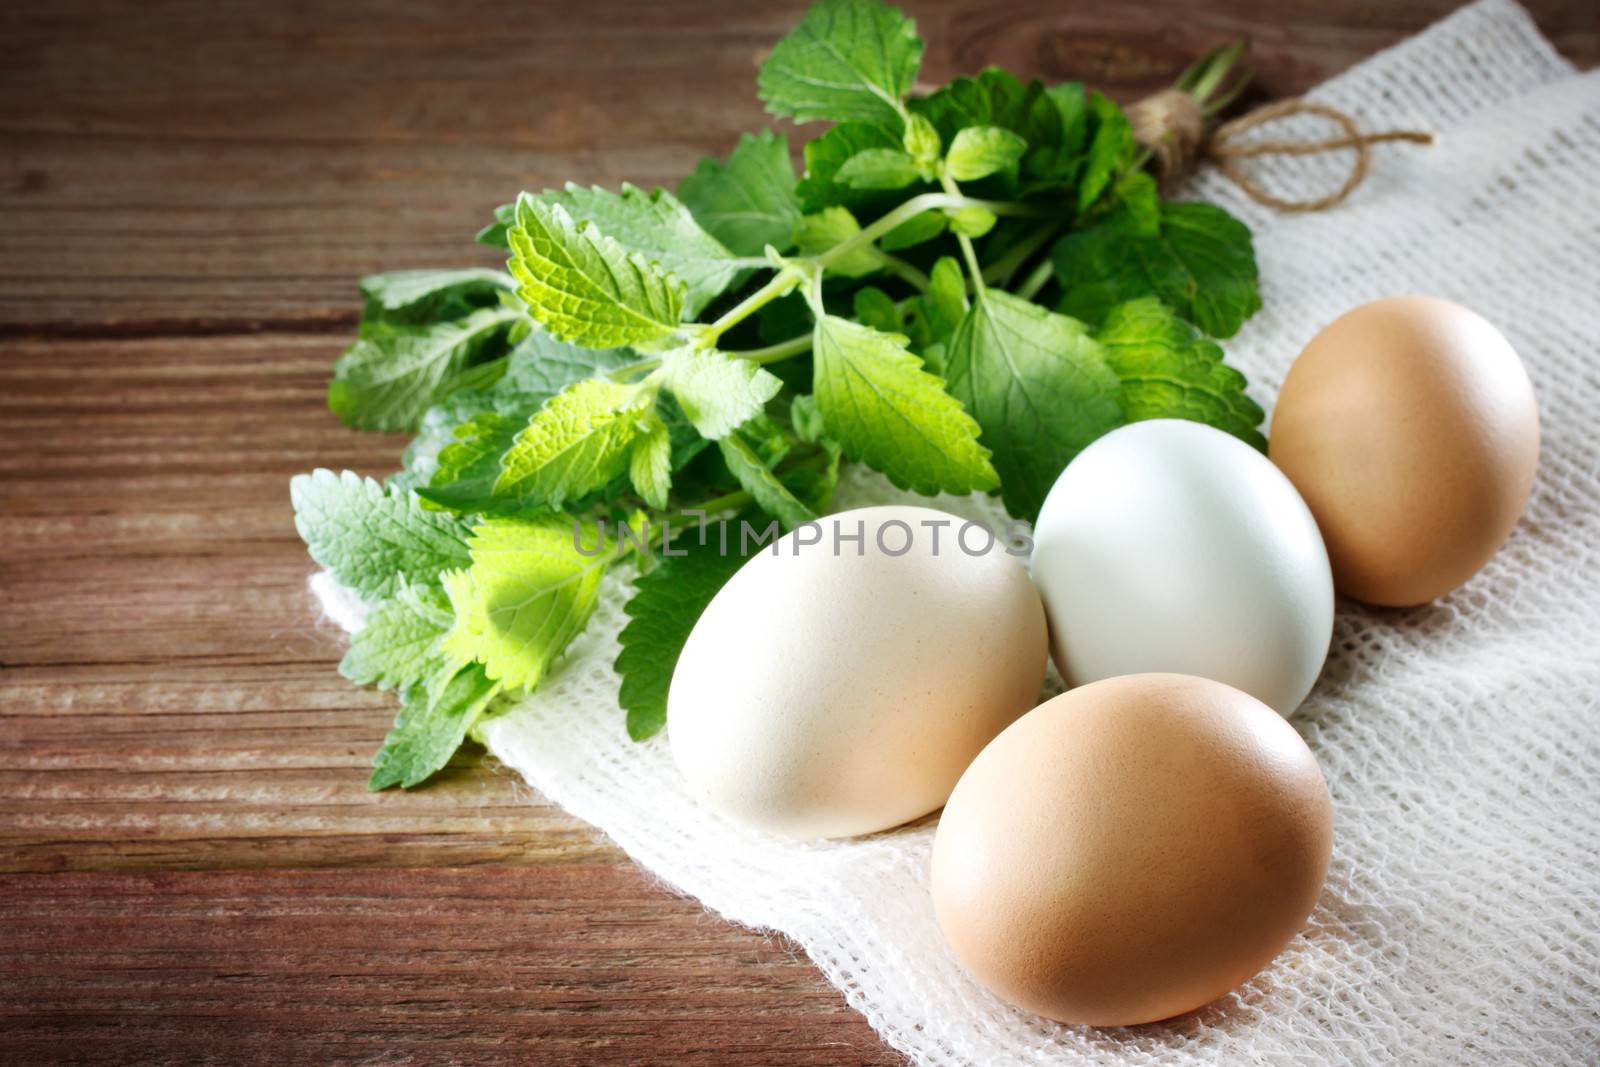 Eggs on a rustic table of wood with a sprig of mint